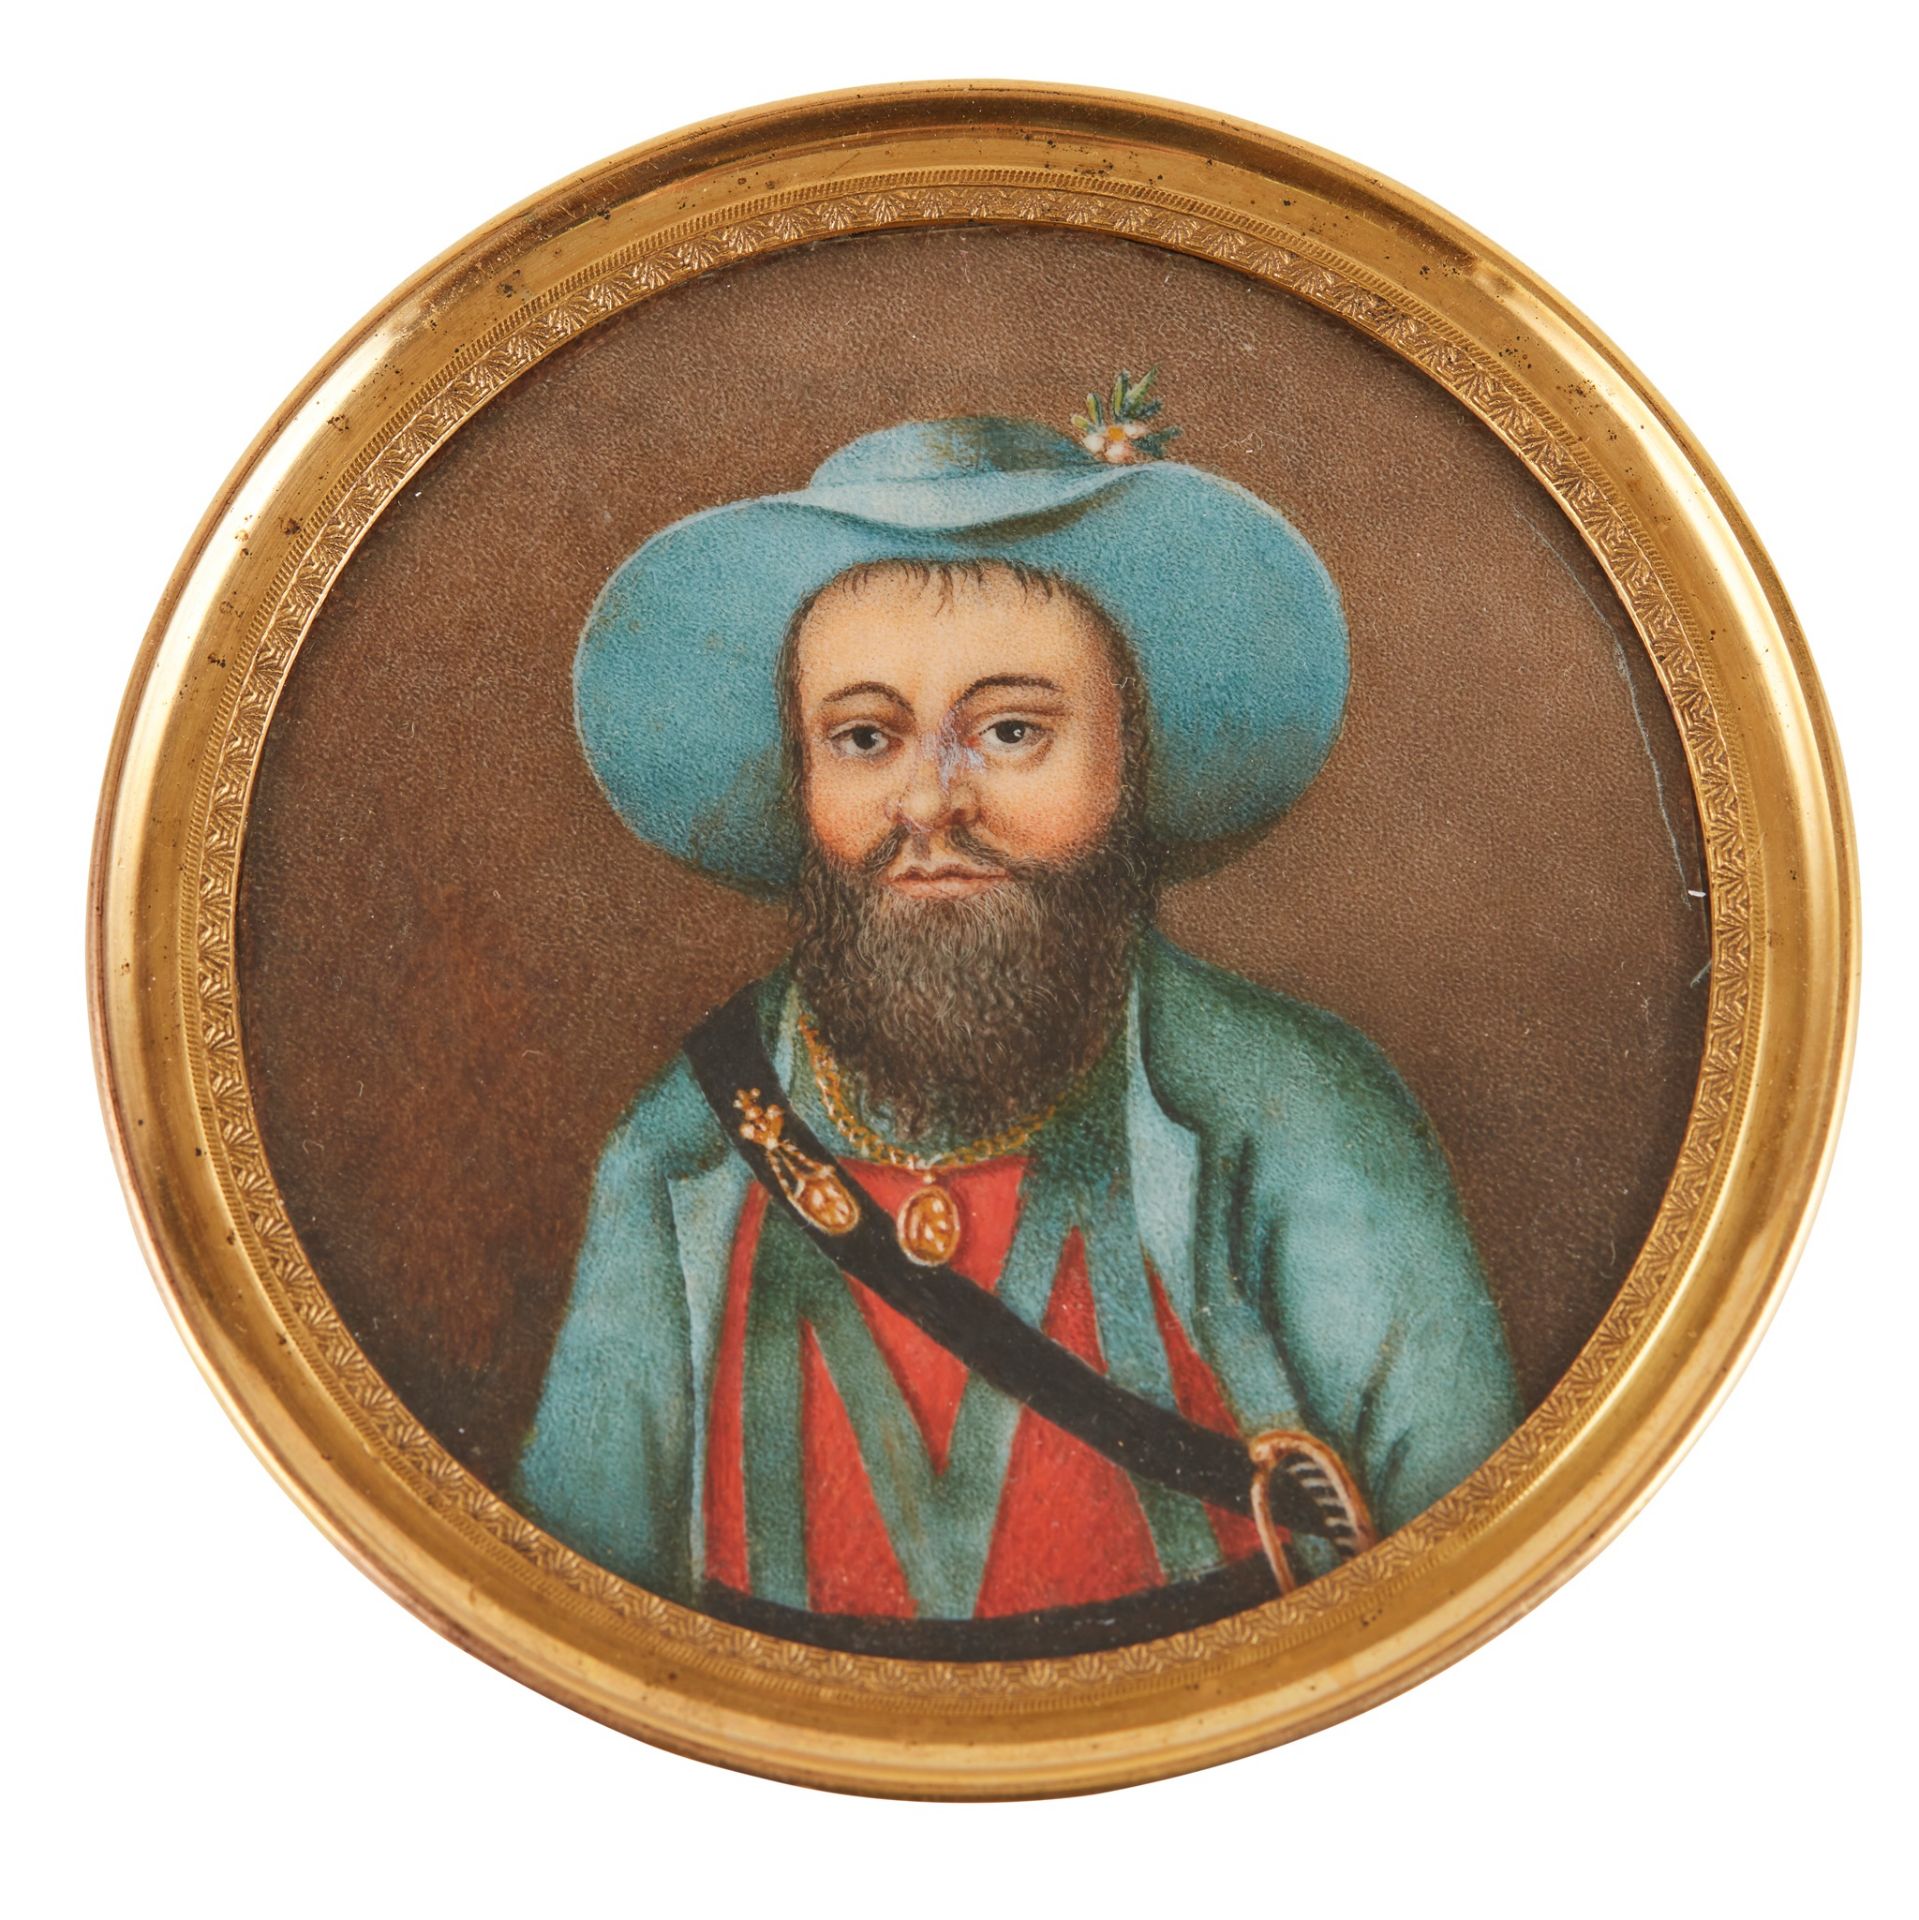 Y 19TH CENTURY CONTINENTAL SCHOOL, PORTRAIT MINIATURE OF ANDREAS HOFER IN THE MANNER OF